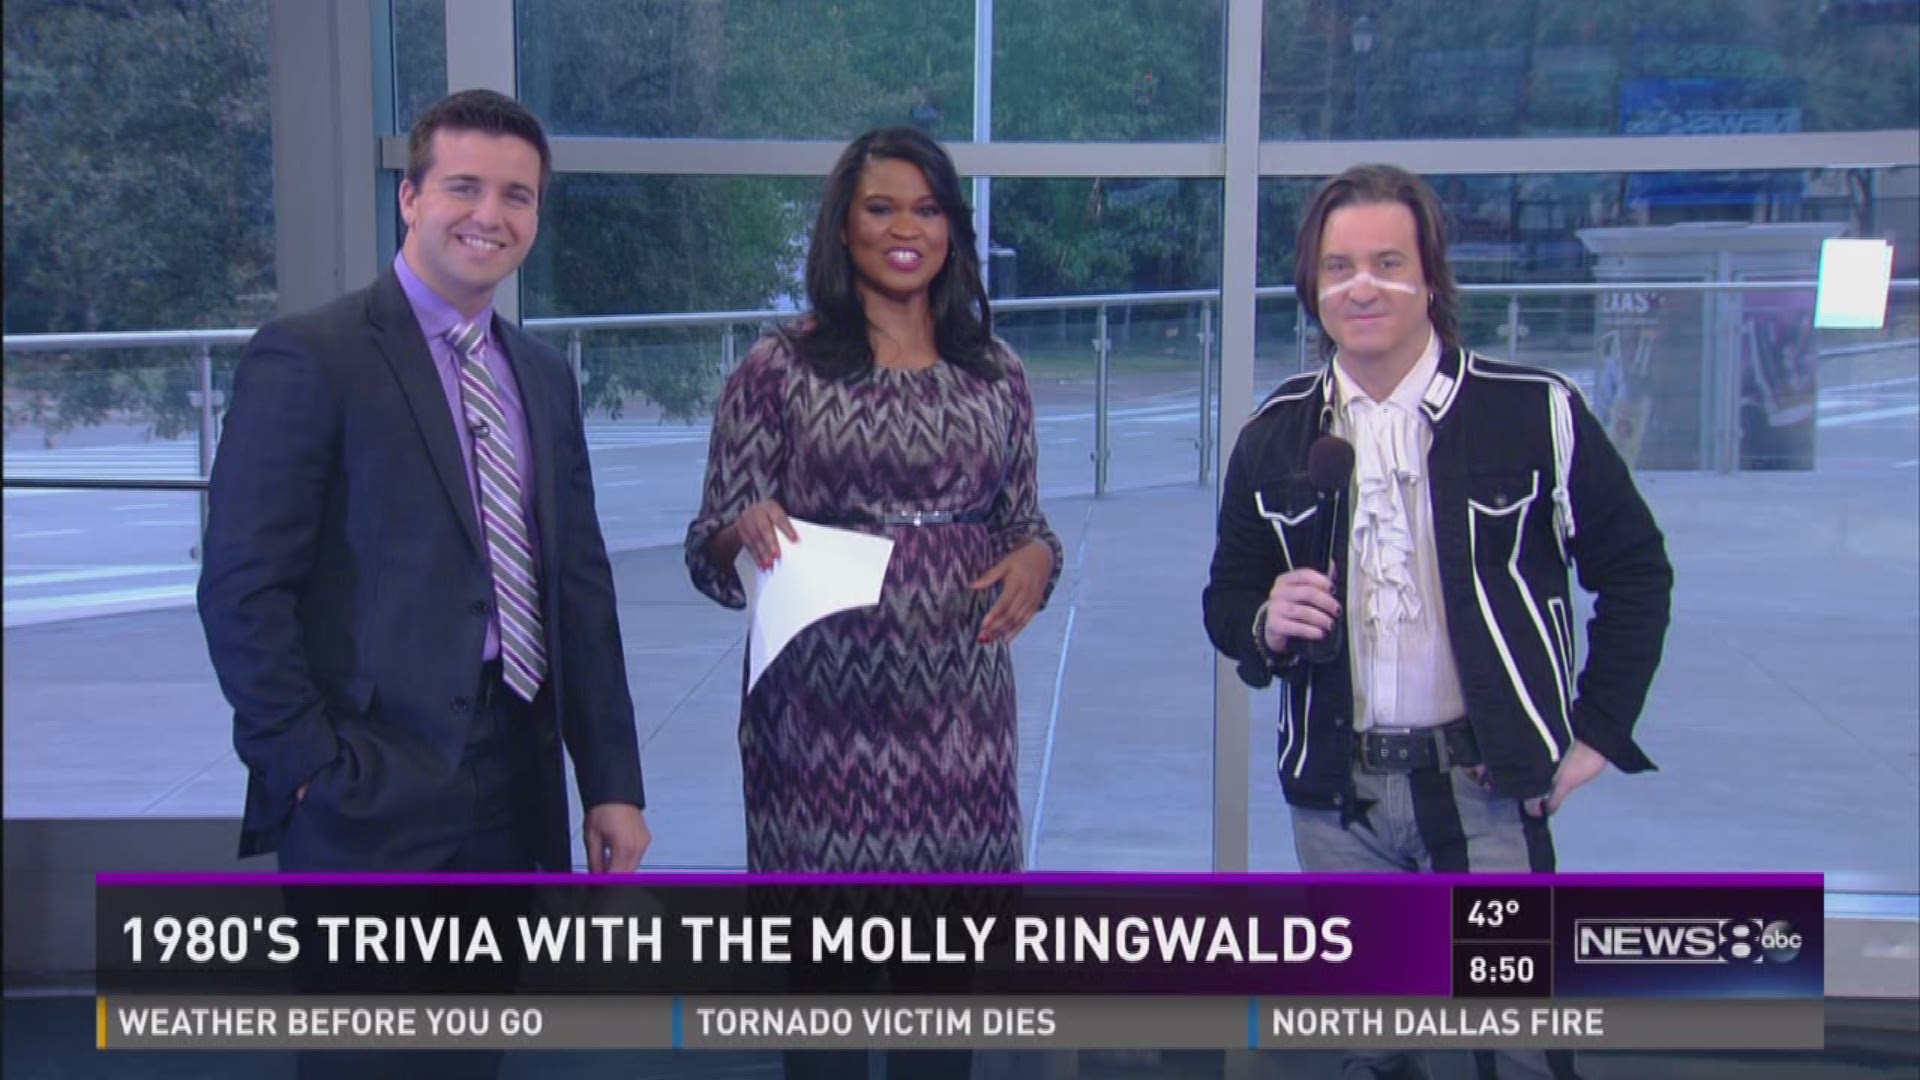 Sir Devon Nooner of the popular rock band trades wits with WFAA's Carla Wade and Wes Houx on 1980s trivia.